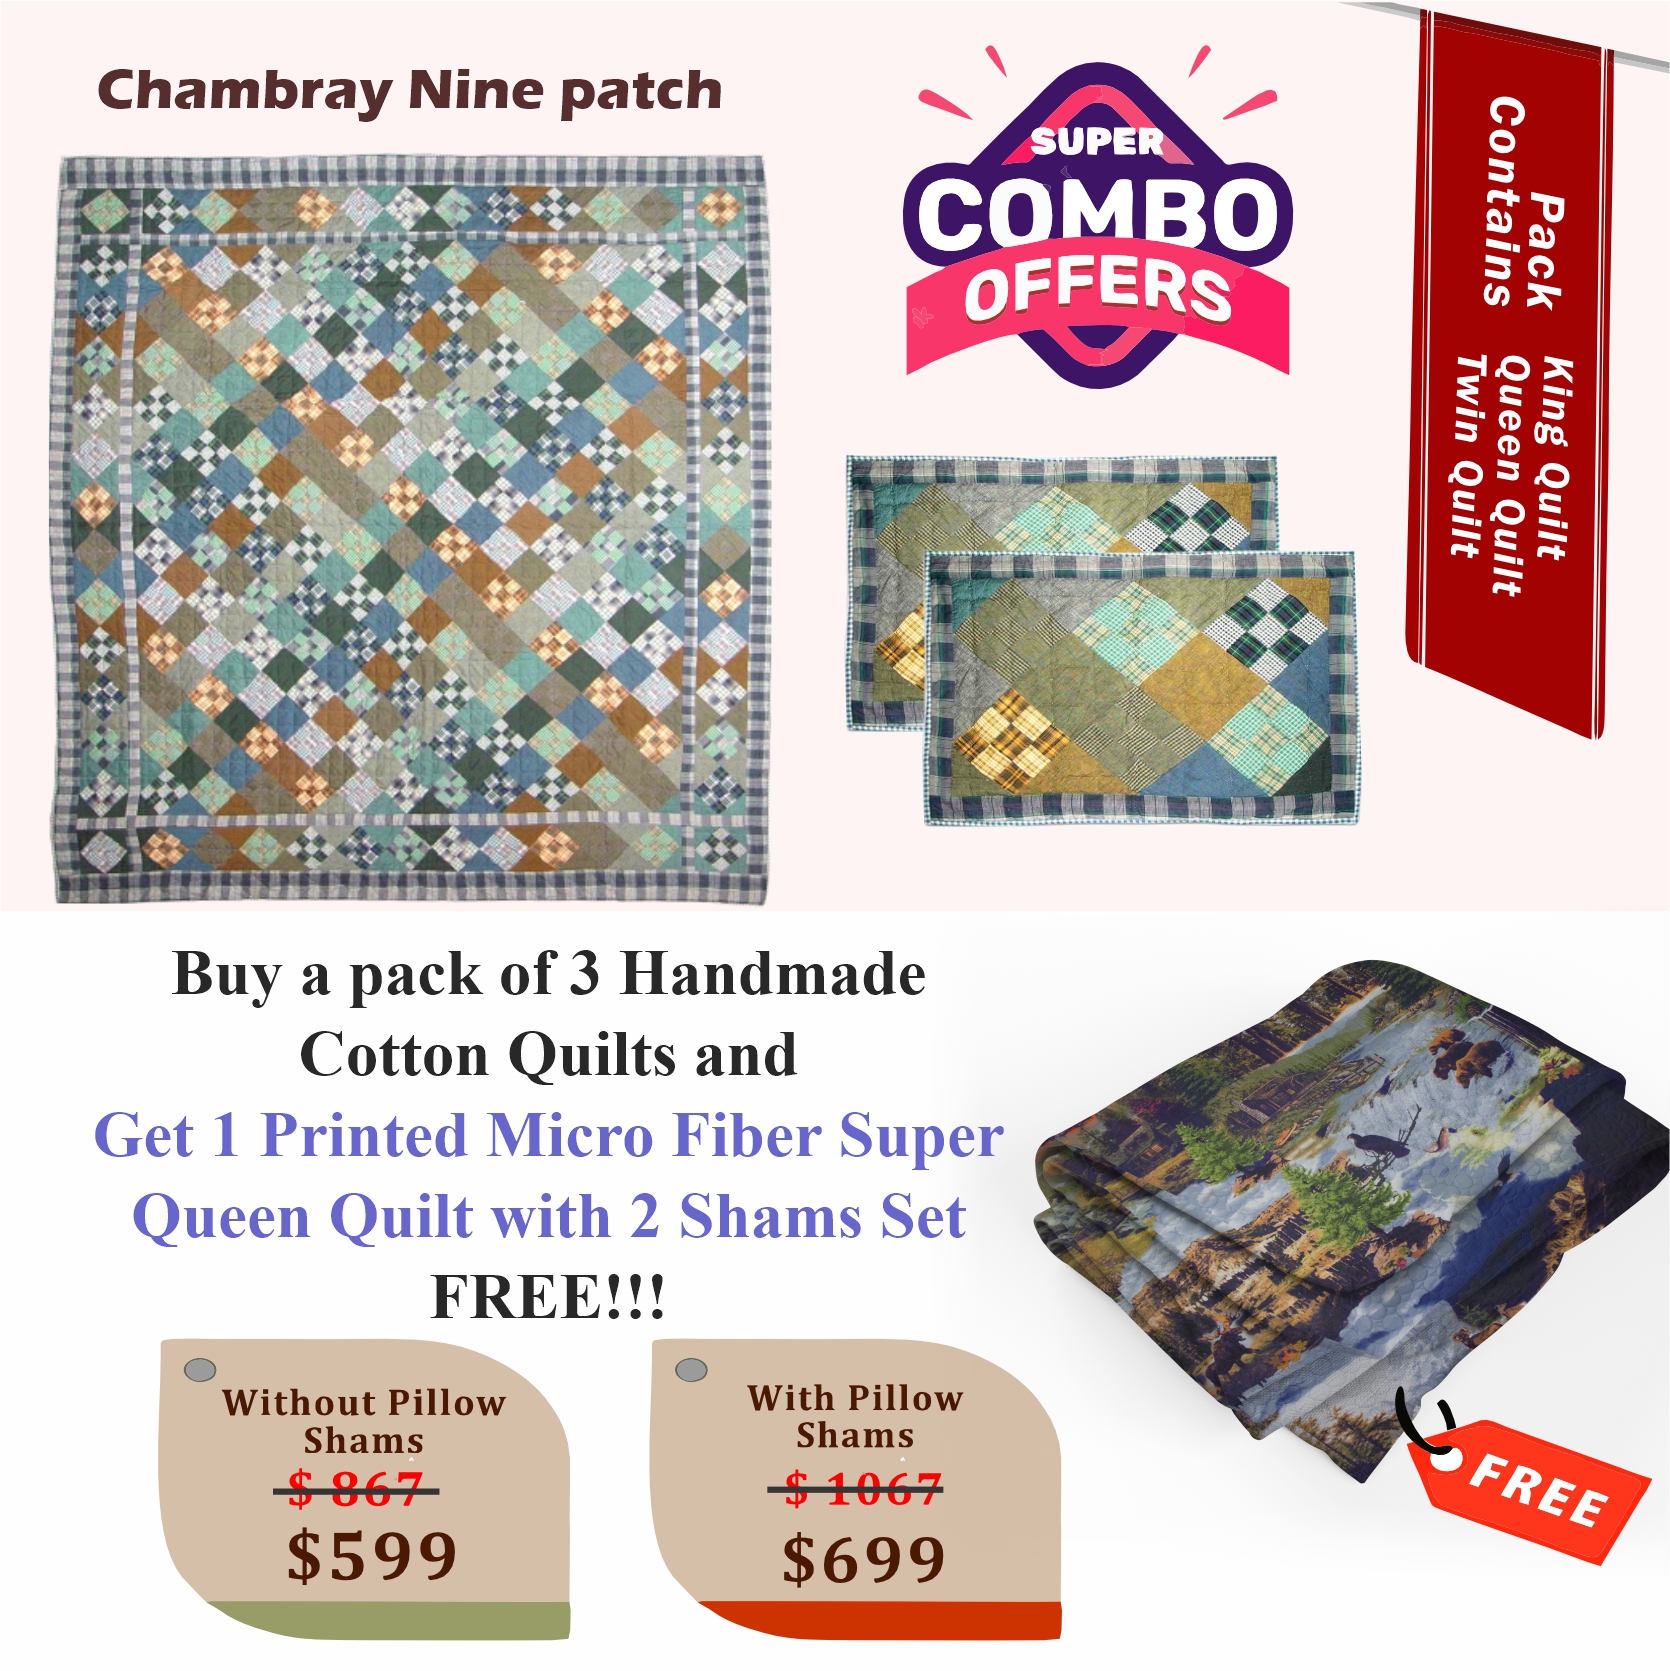 Spirit of Nine - Handmade Cotton quilts | Matching pillow shams | Buy 3 cotton quilts and get 1 Printed Microfiber Super Queen Quilt with 2 Shams set FREE